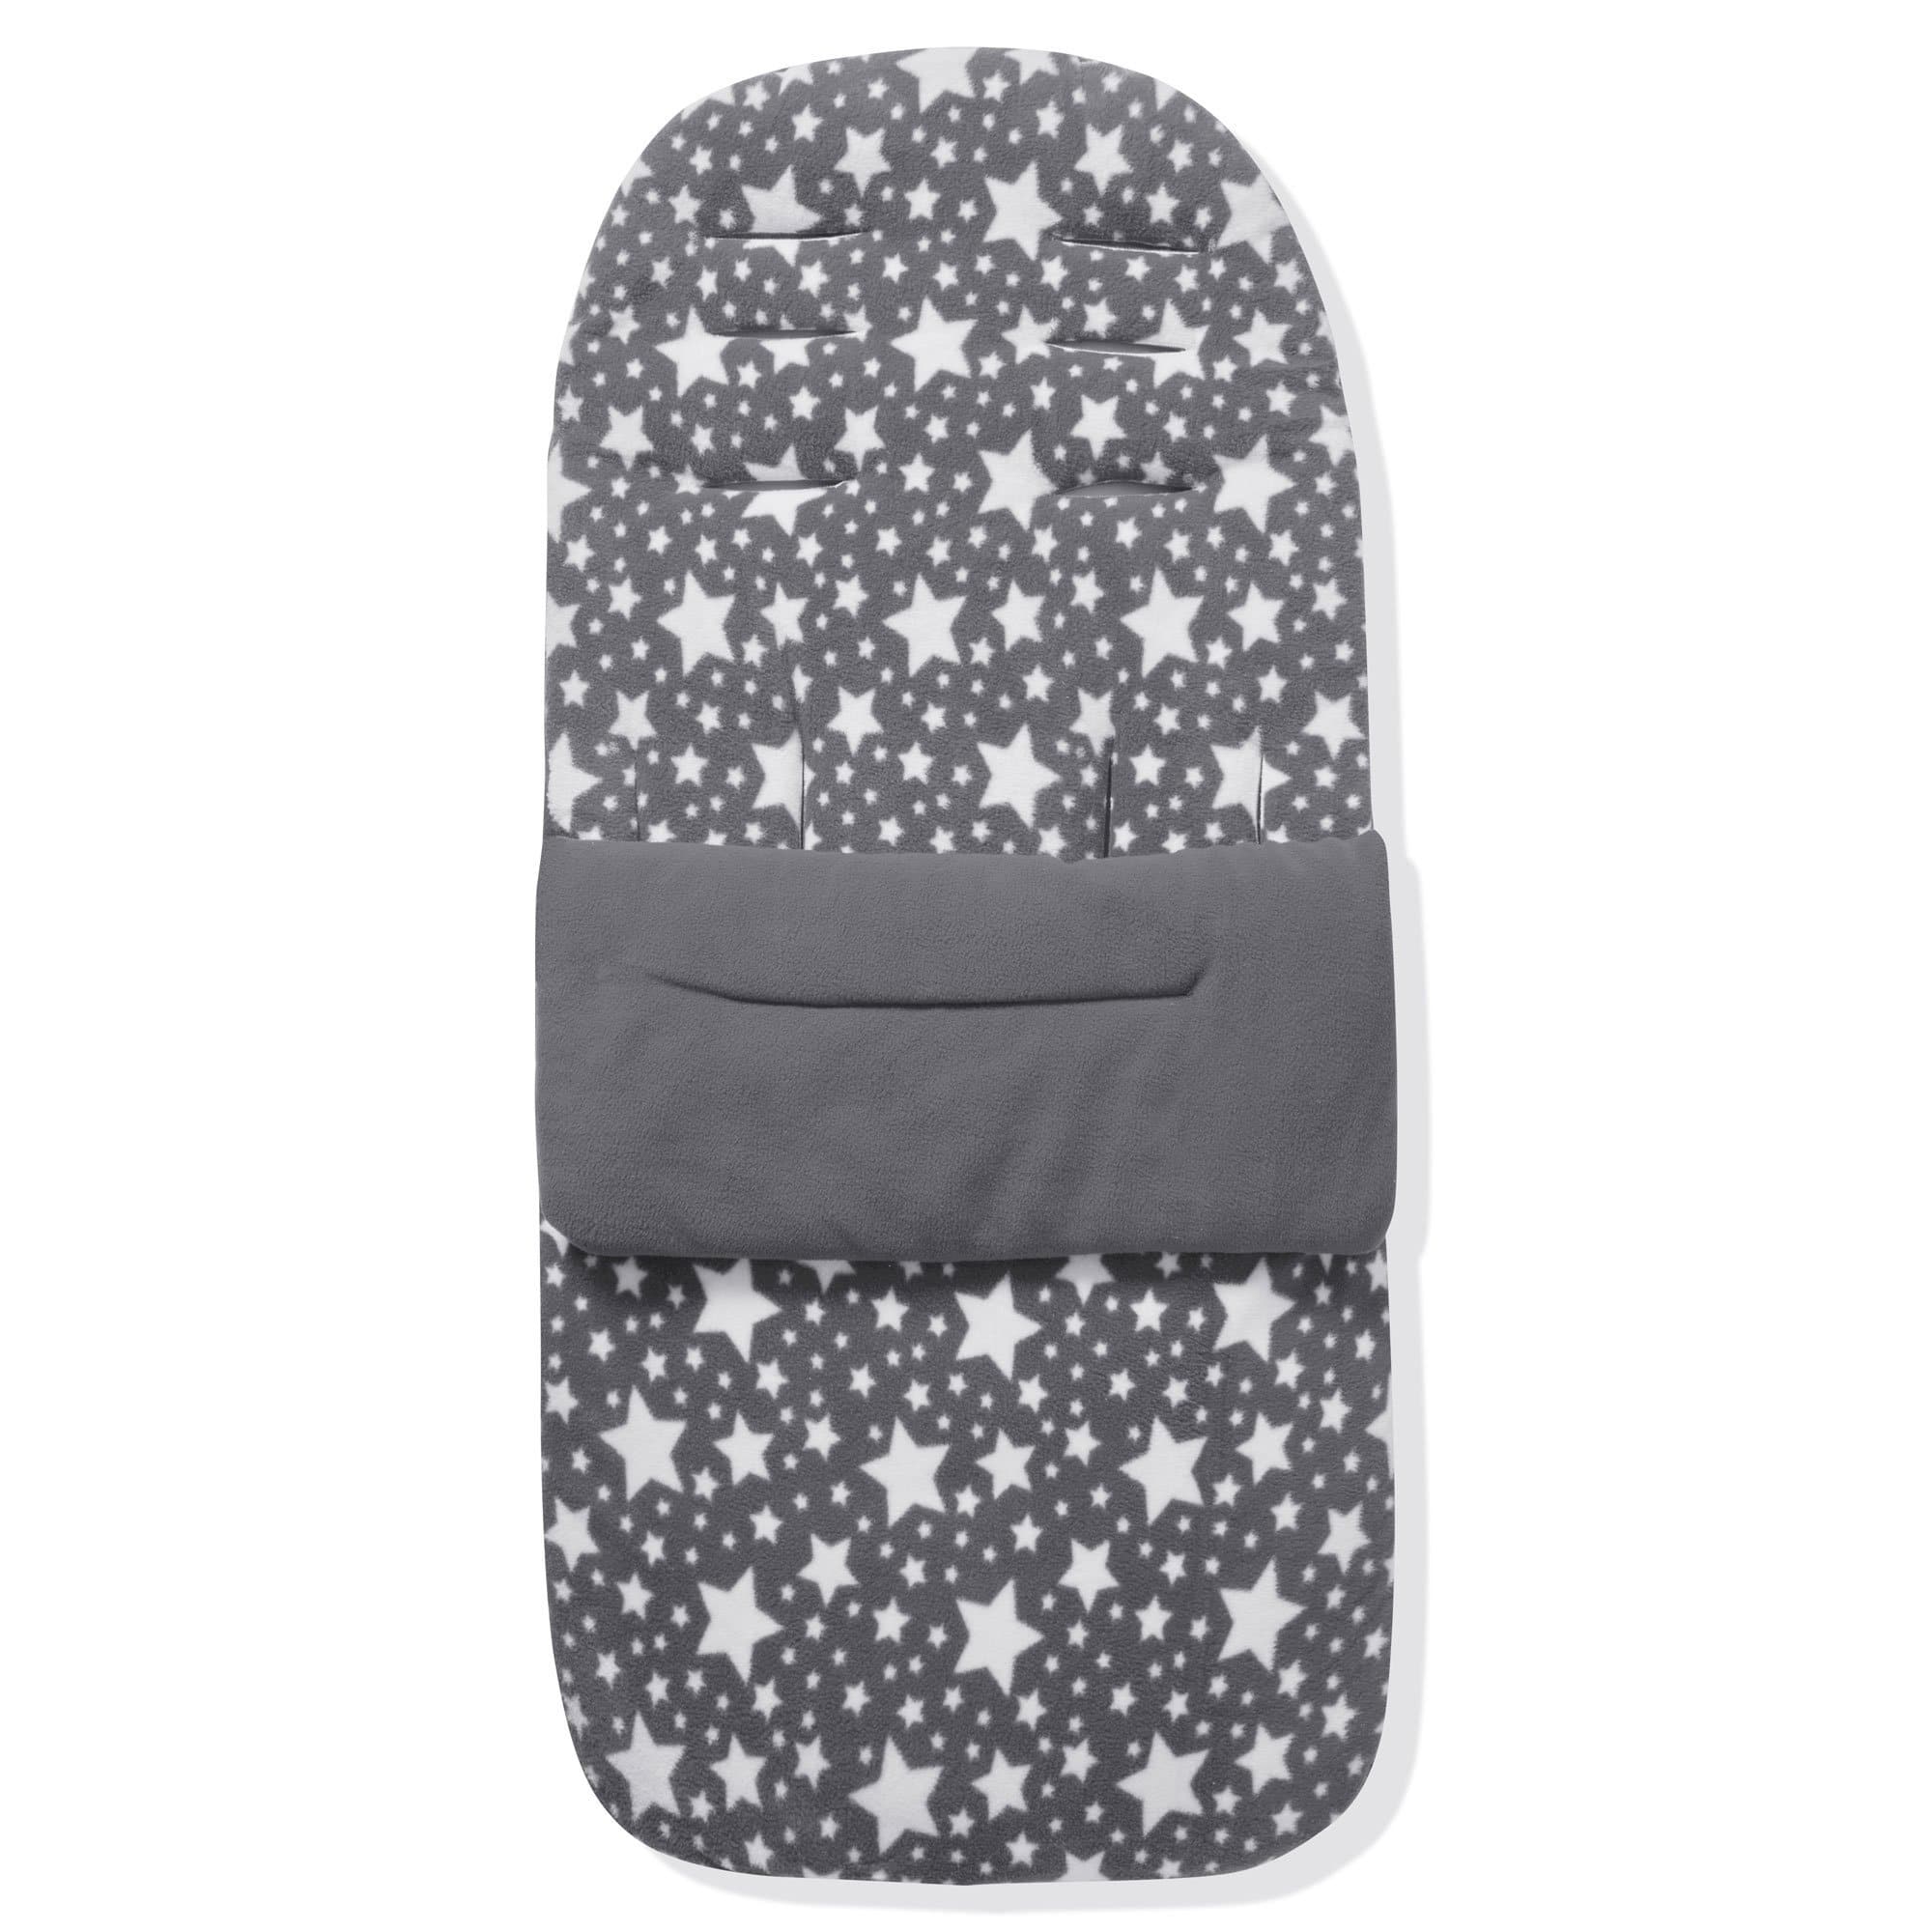 Fleece Footmuff / Cosy Toes Compatible with Babyzen - Grey Star / Fits All Models | For Your Little One